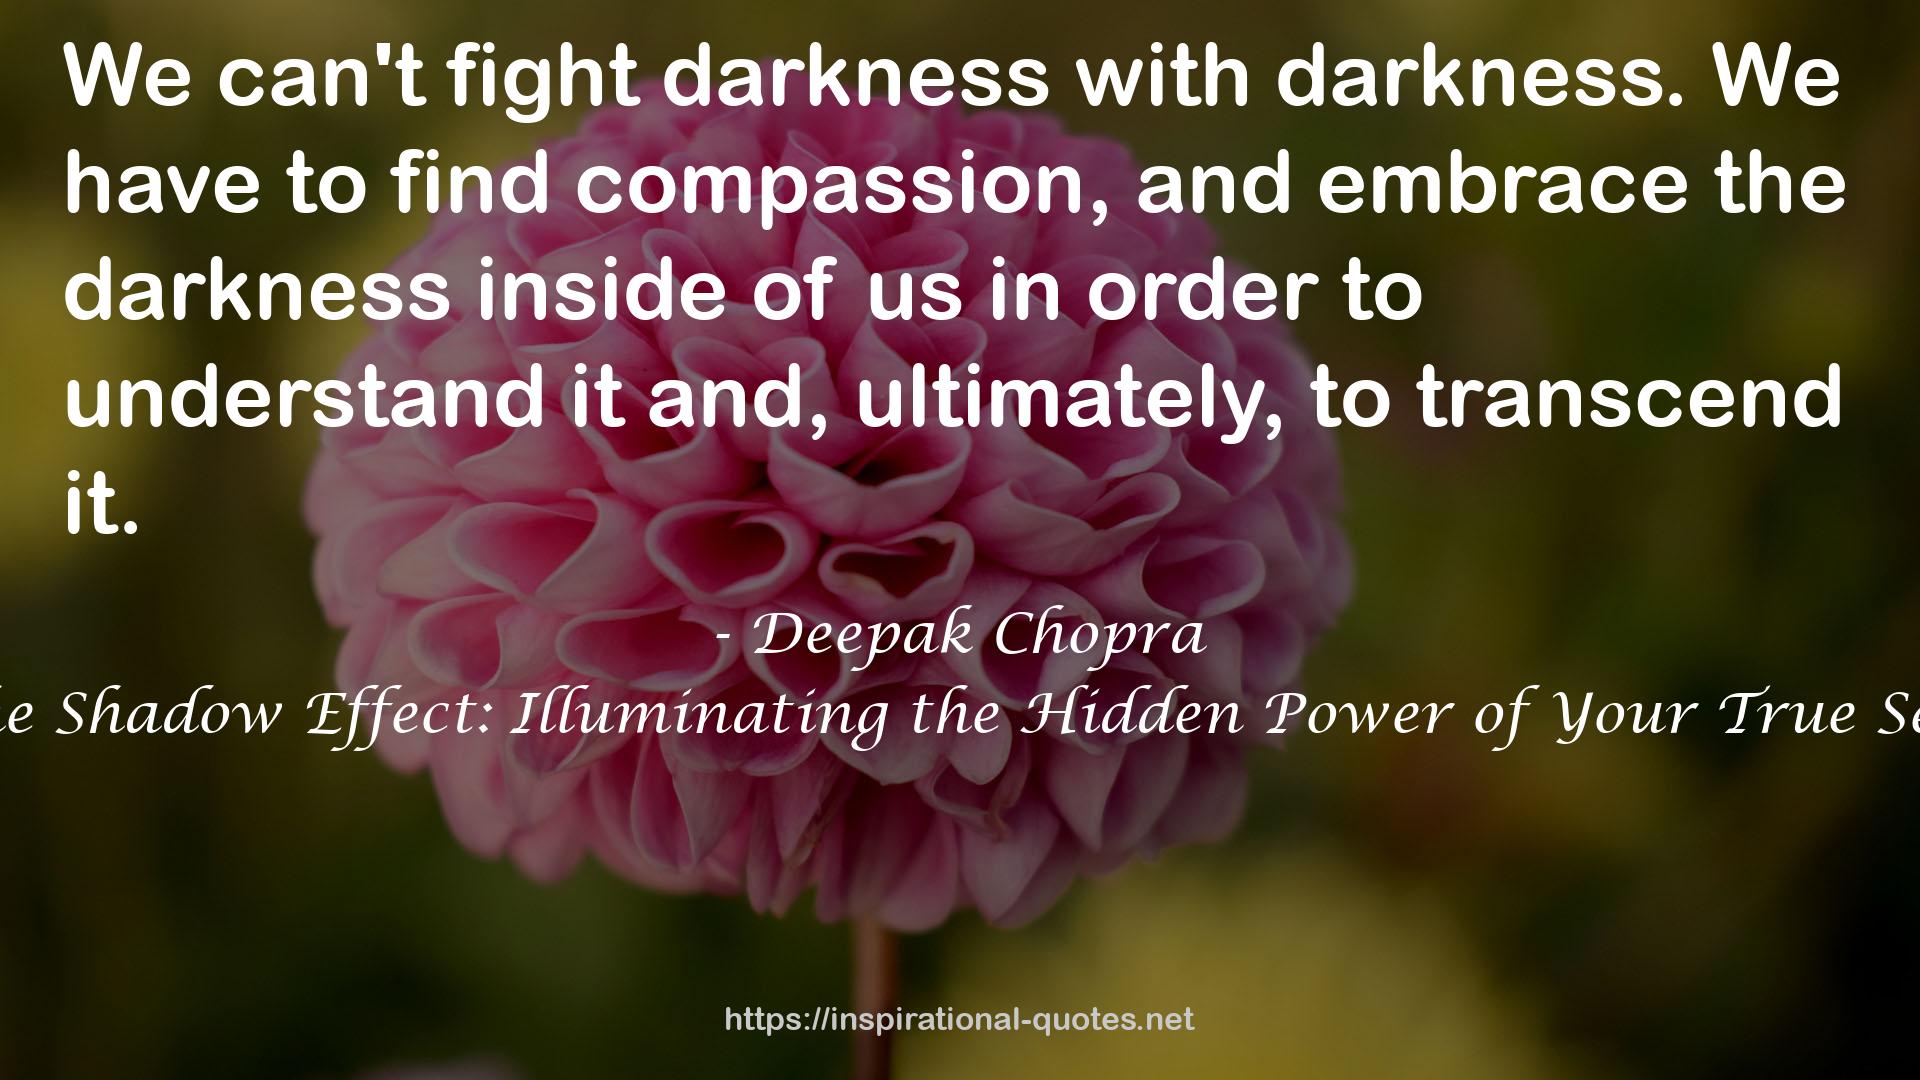 The Shadow Effect: Illuminating the Hidden Power of Your True Self QUOTES